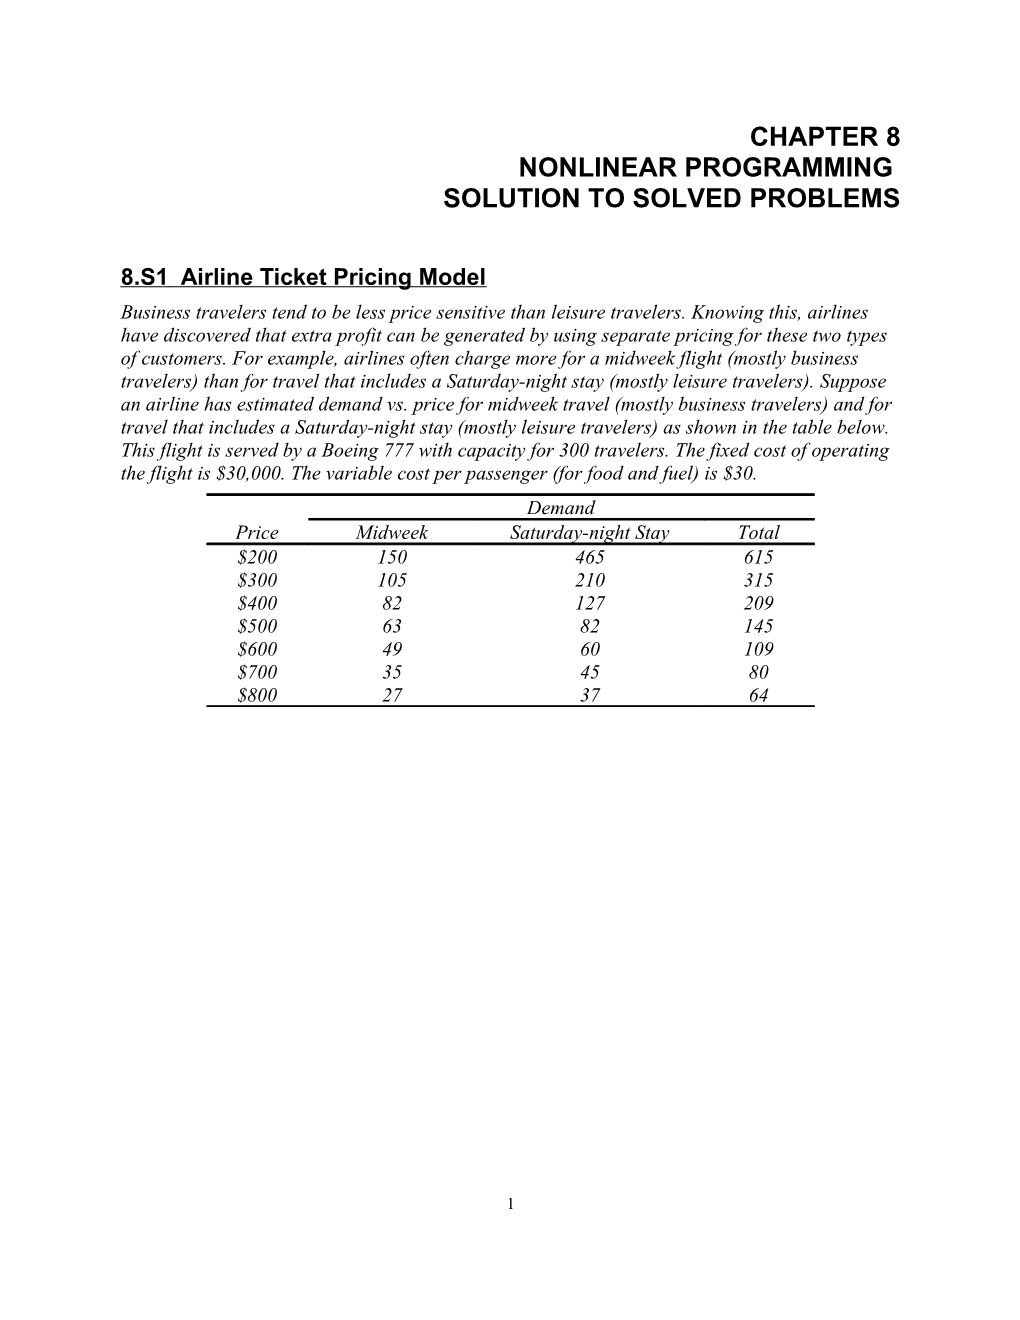 Chapter 8 Nonlinear Programming Solution to Solved Problems